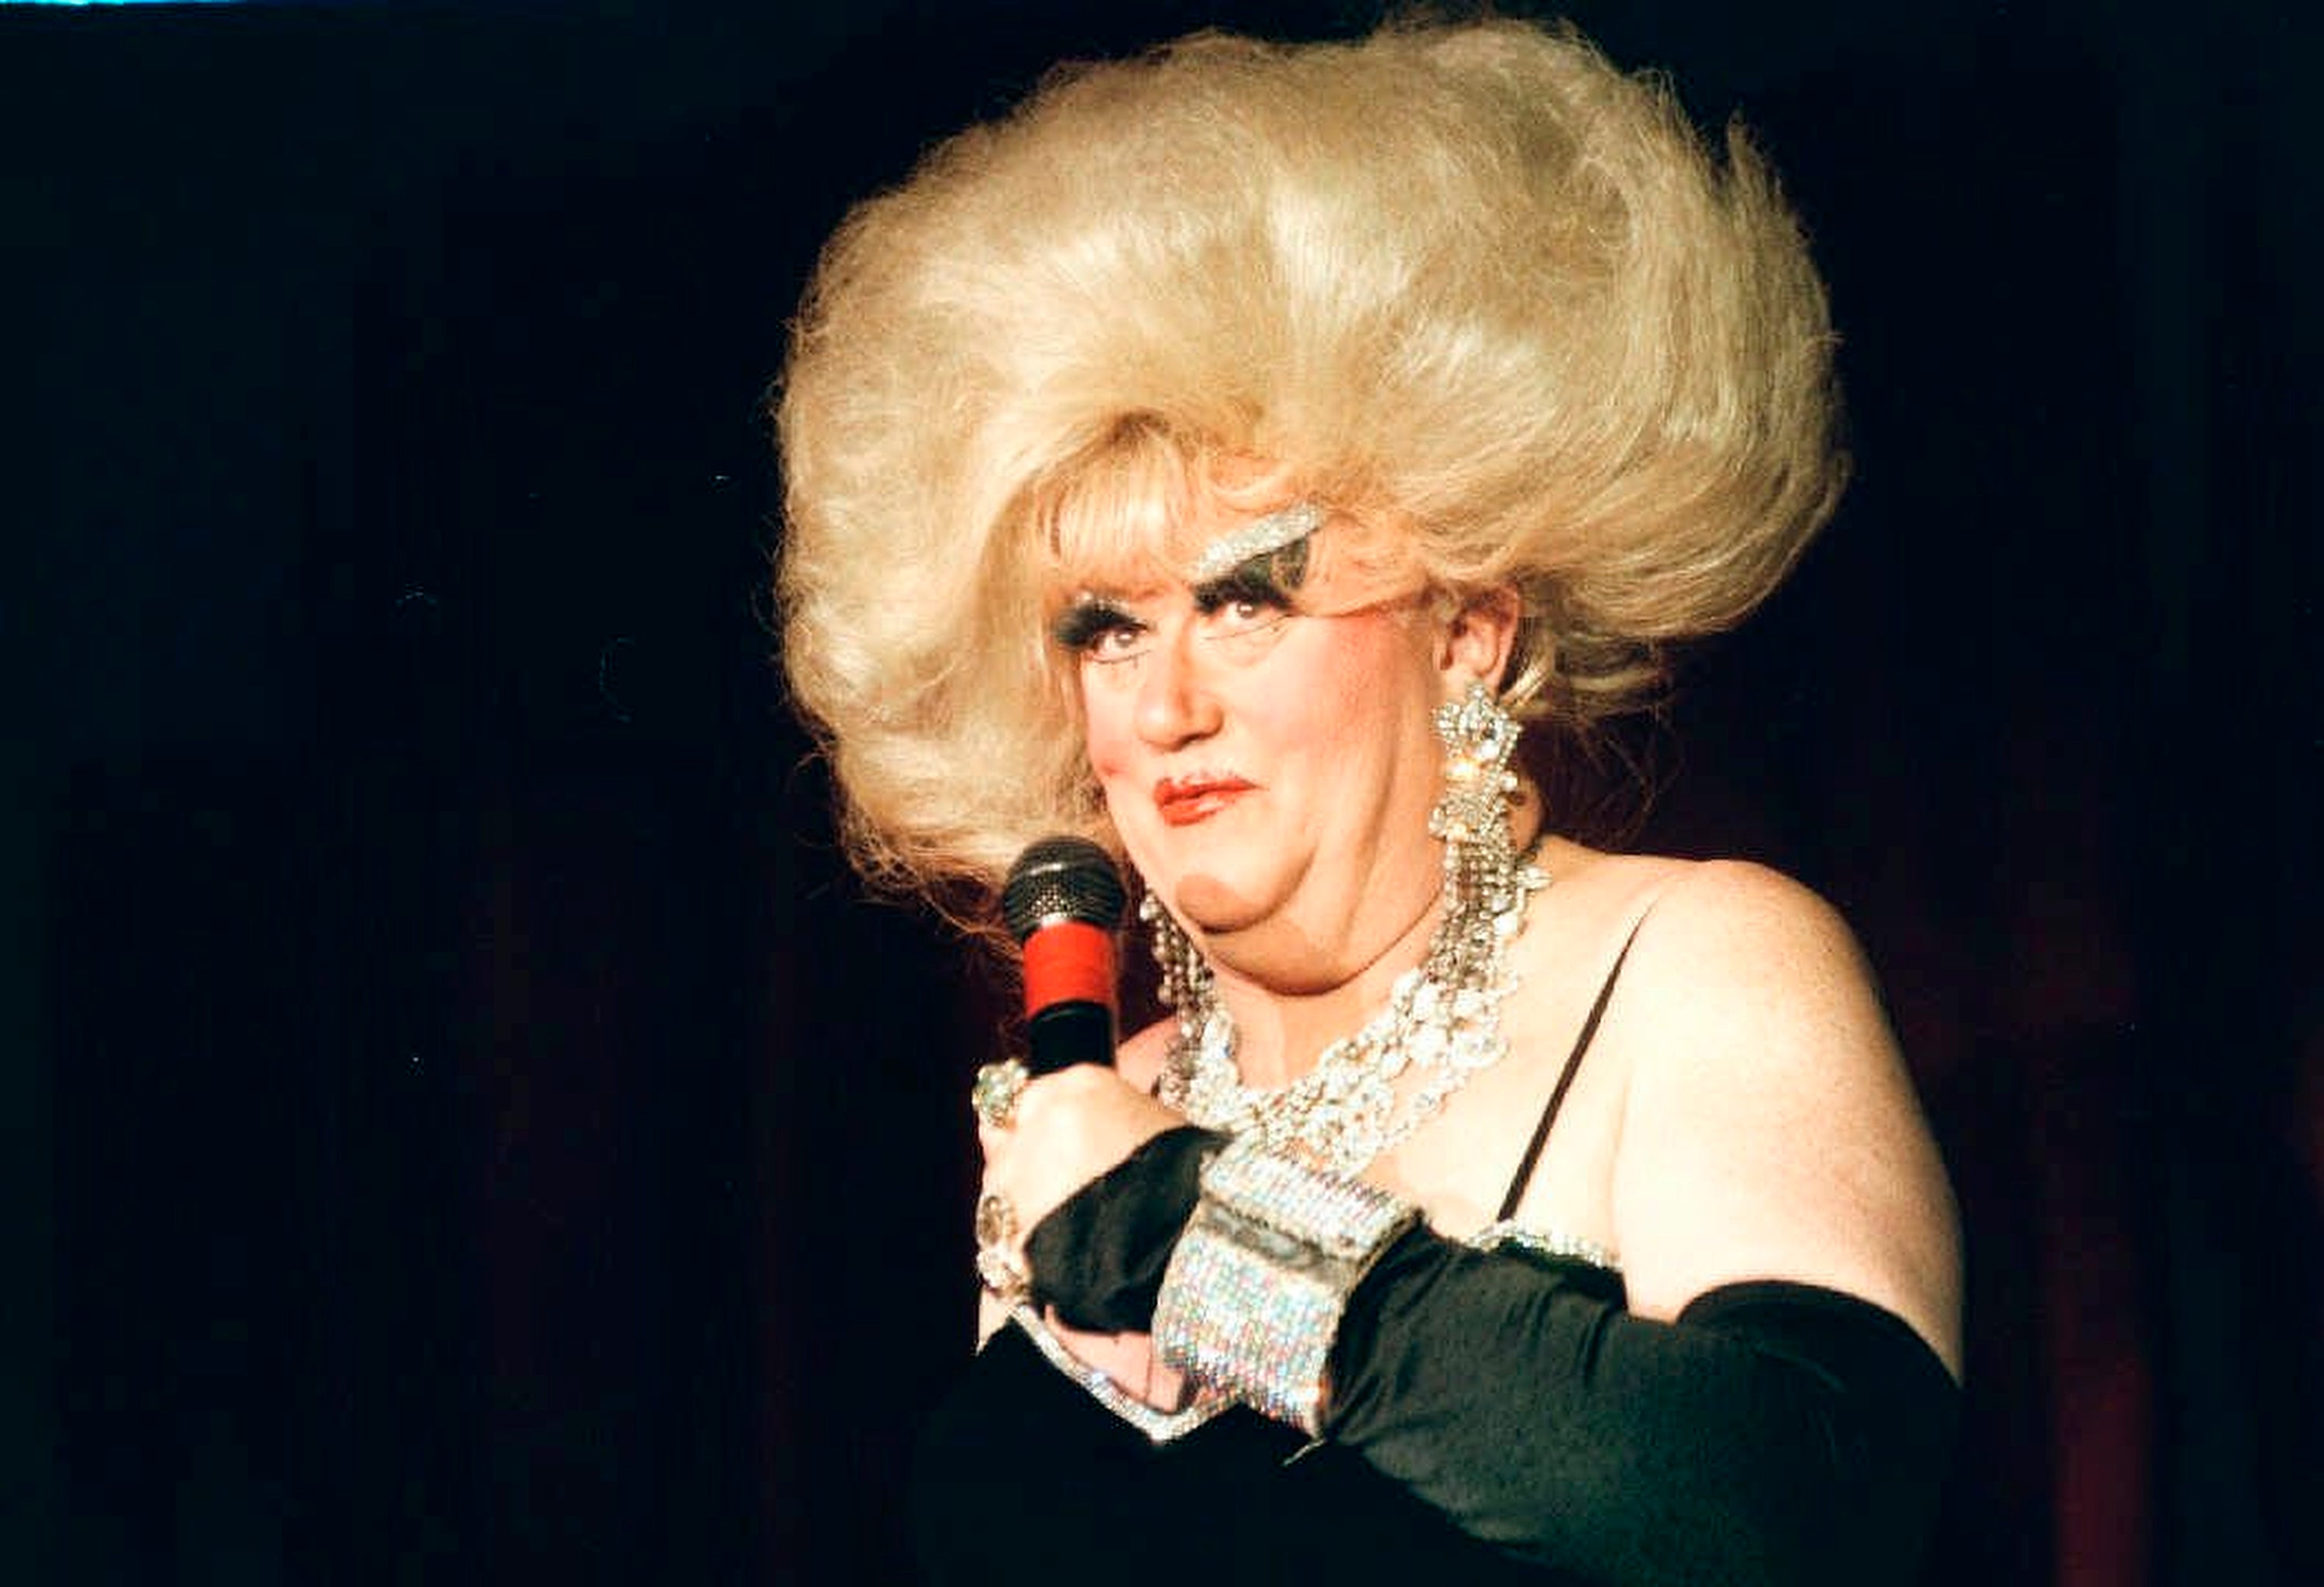 Portland, Oregon to rename downtown square after legendary drag ...